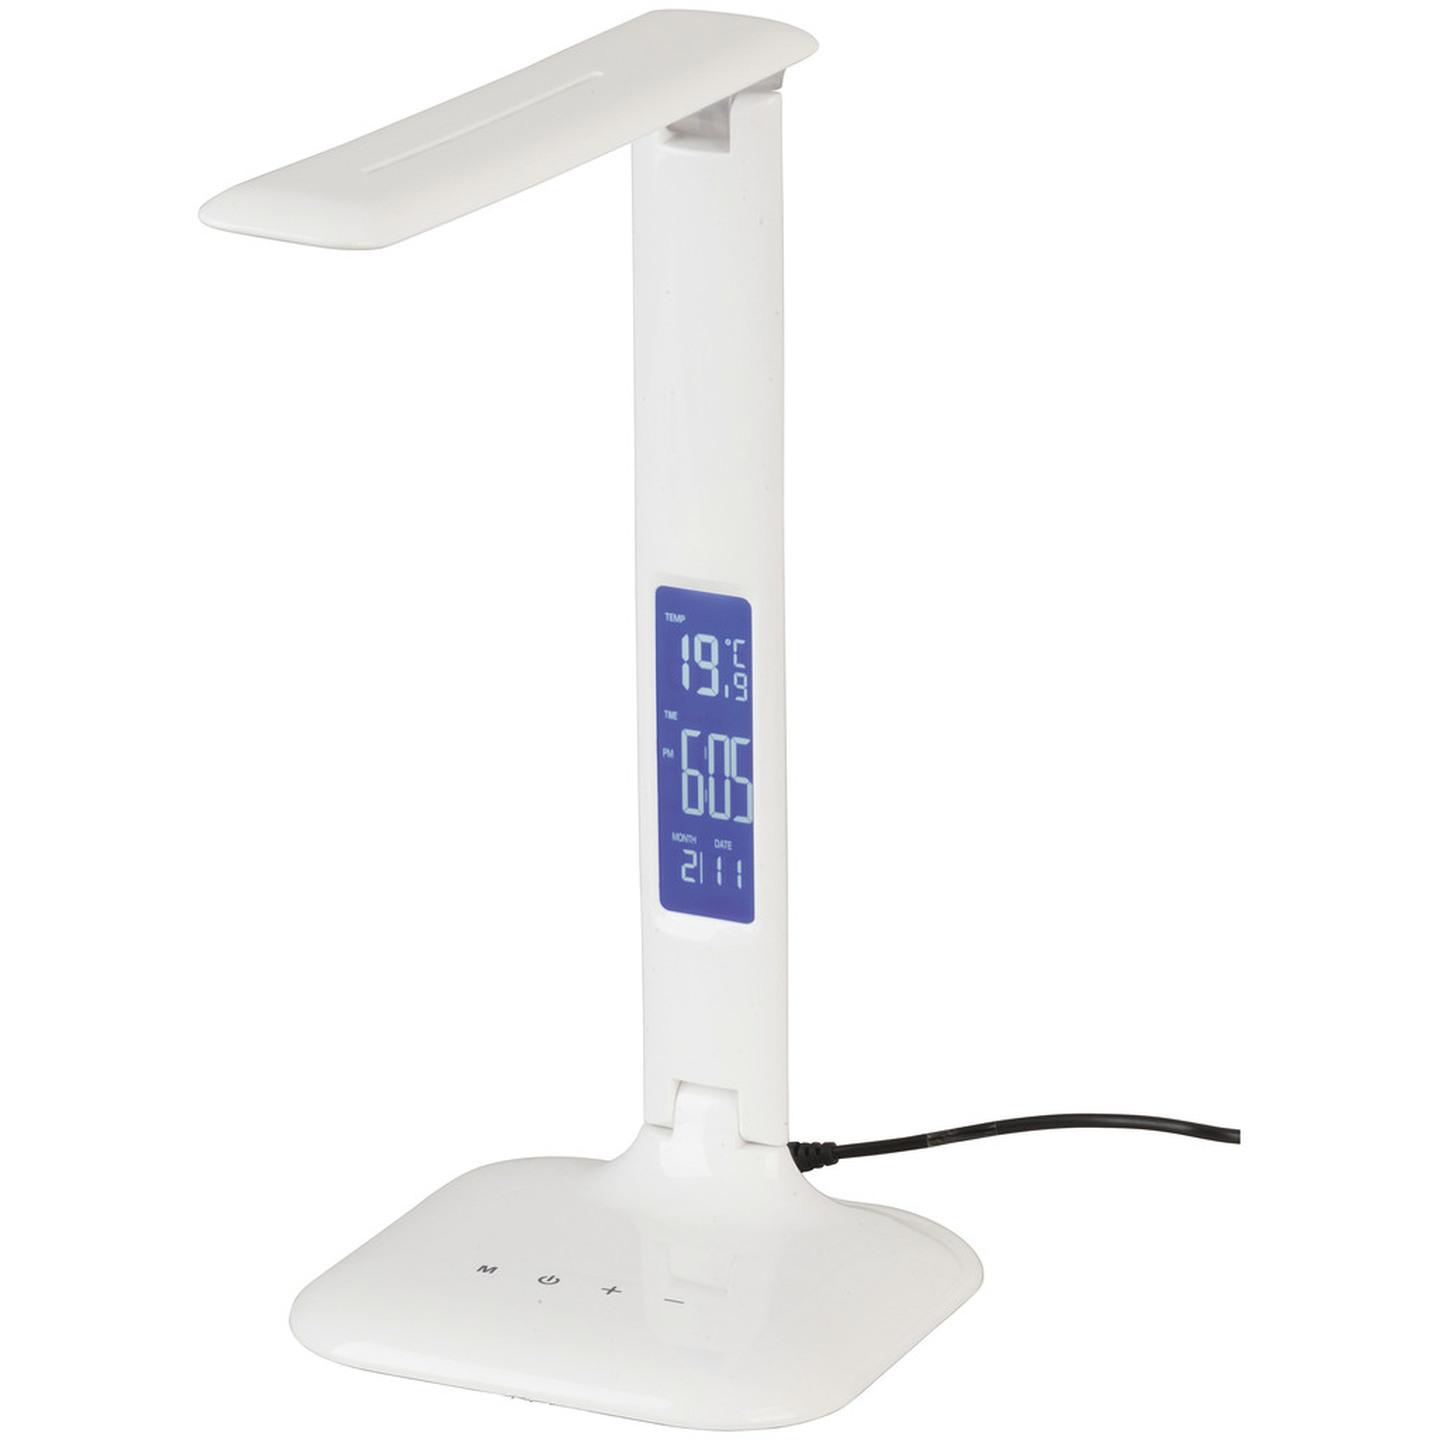 14 LED Adjustable Colour Temperature Lamp with LCD Clock